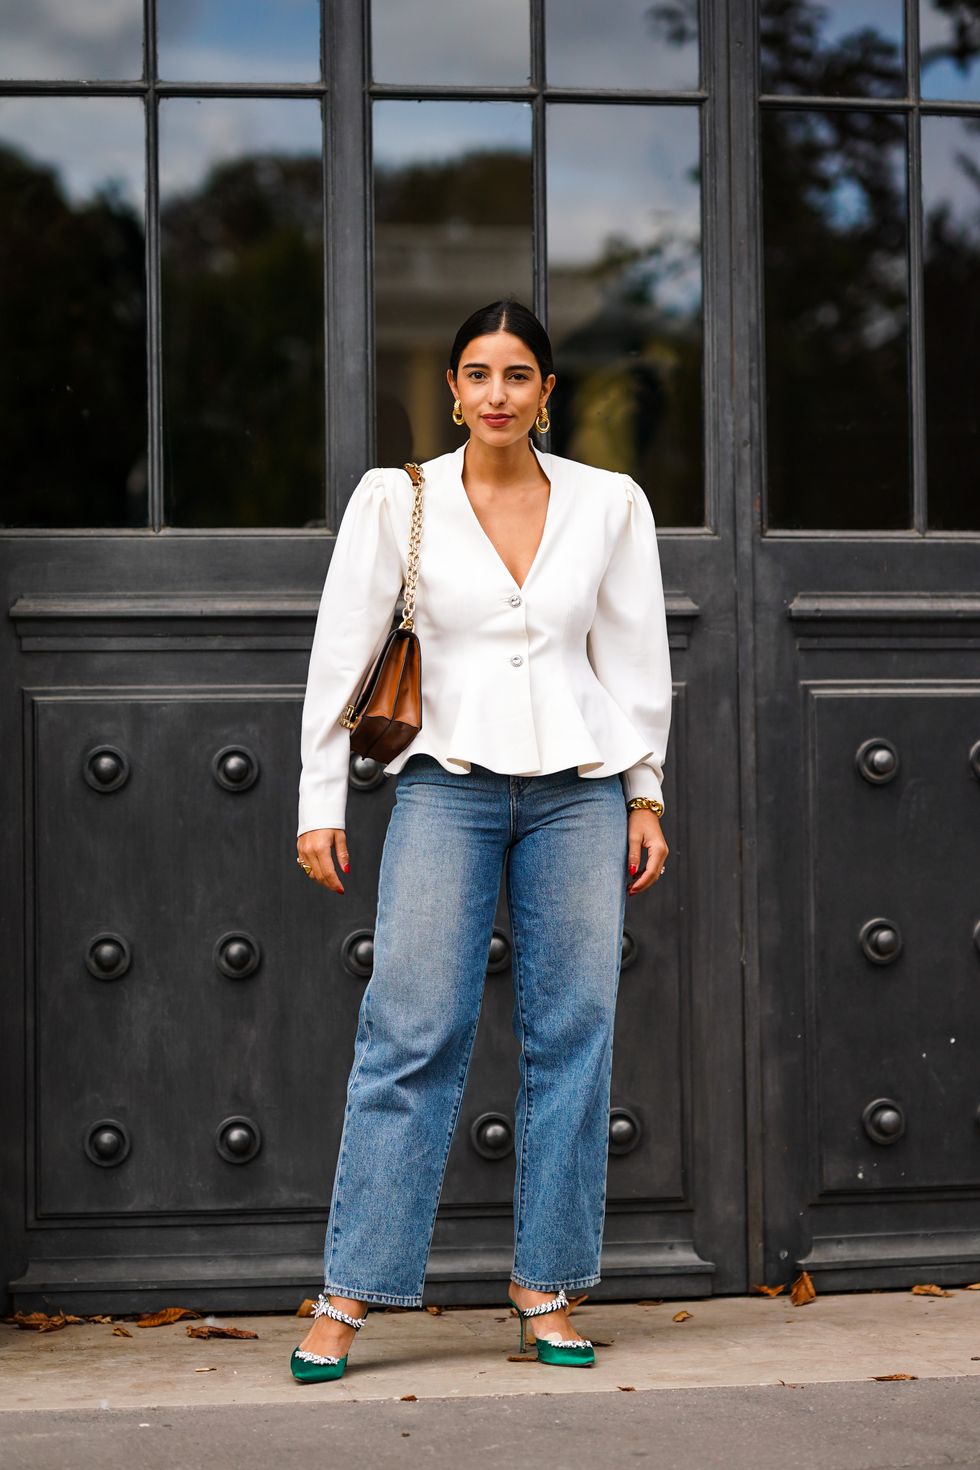 https://hips.hearstapps.com/hmg-prod/images/bettina-looney-wears-a-white-ruffled-jacket-blue-large-news-photo-1638816764.jpg?crop=1xw:1xh;center,top&resize=980:*